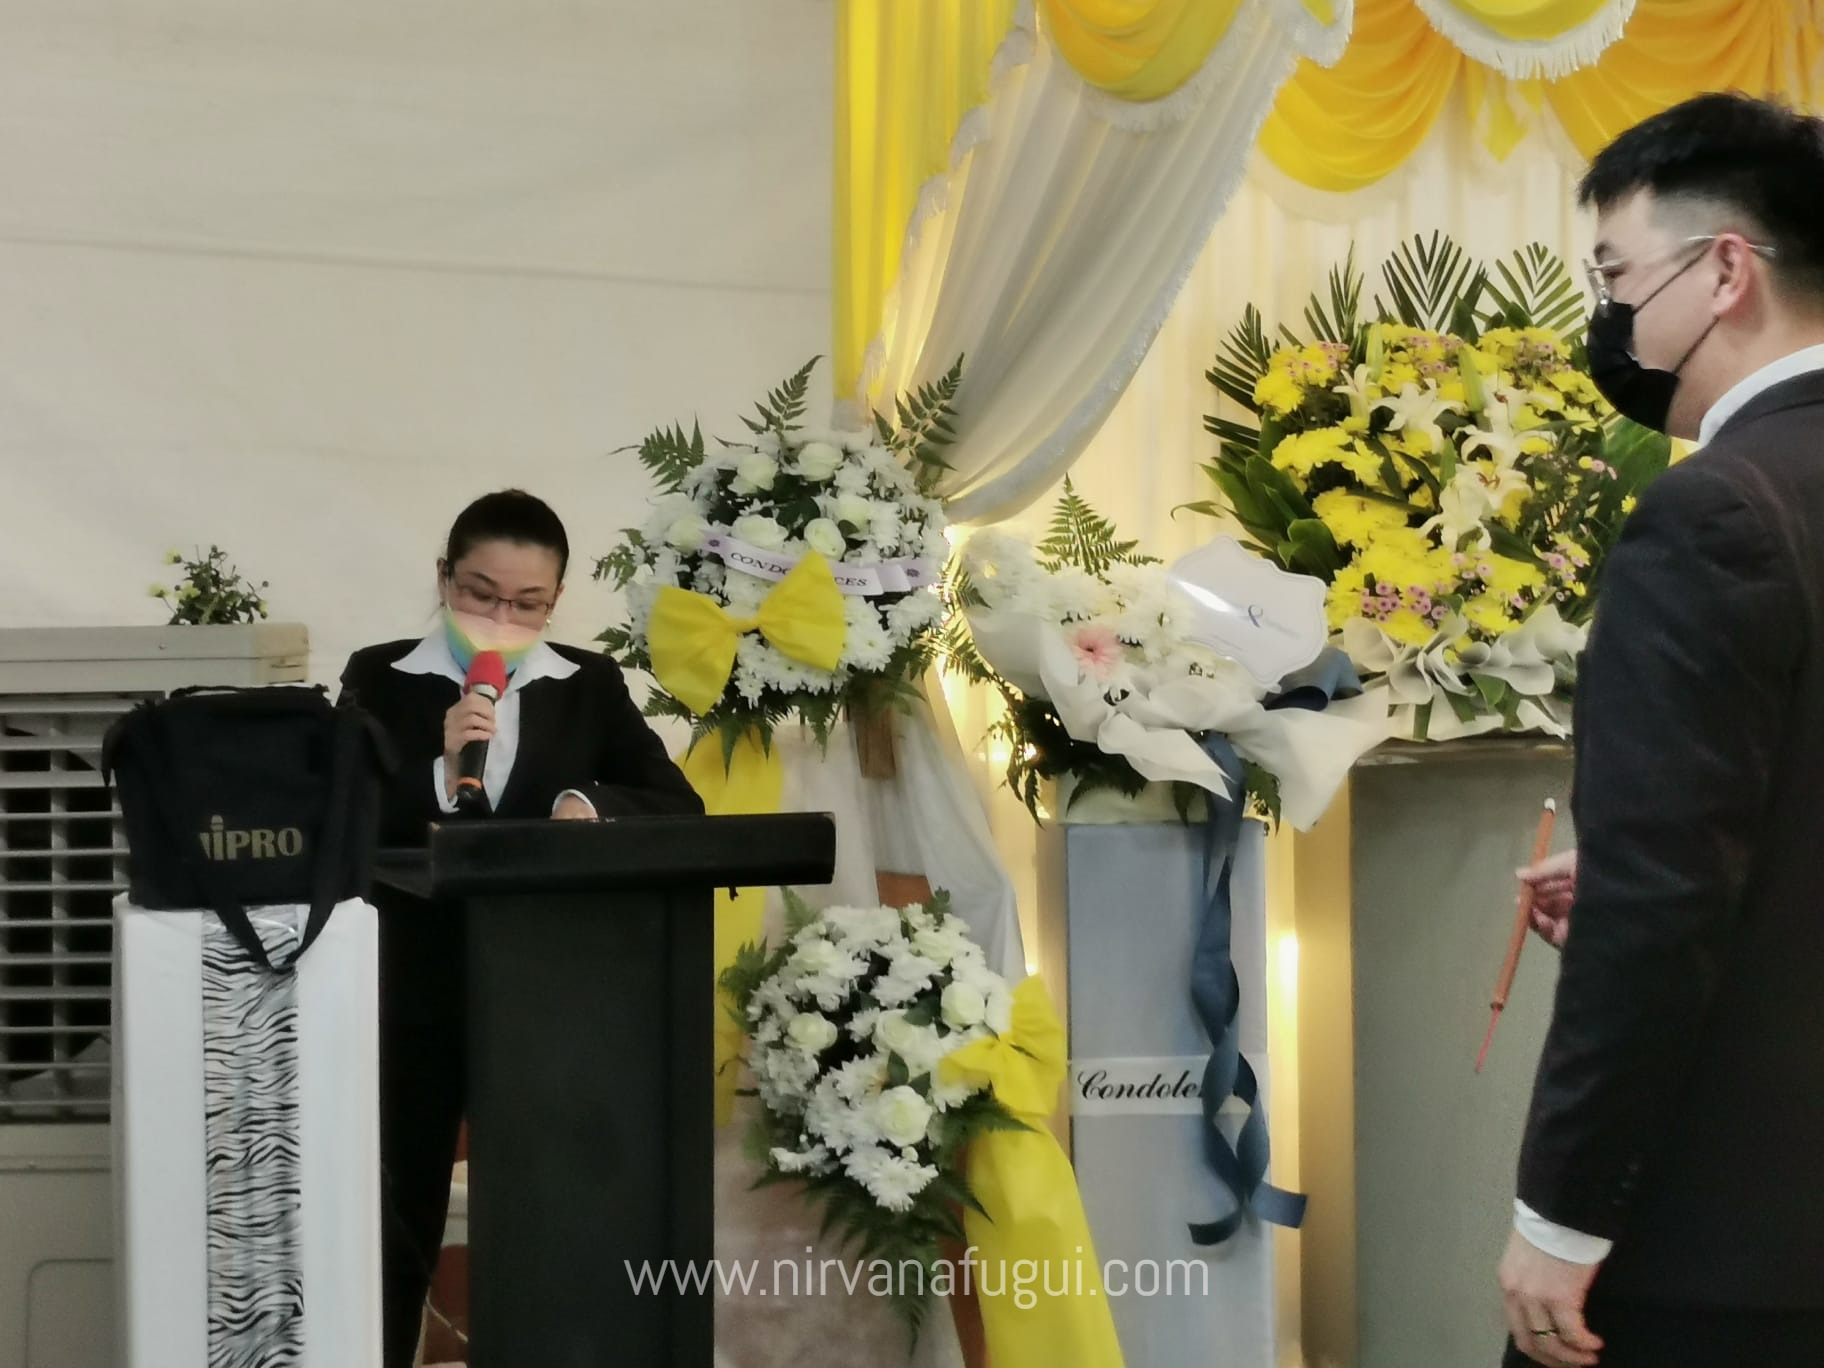 A female funeral director from Nirvana Singapore on an emcee role at a client's Buddhist funeral wake